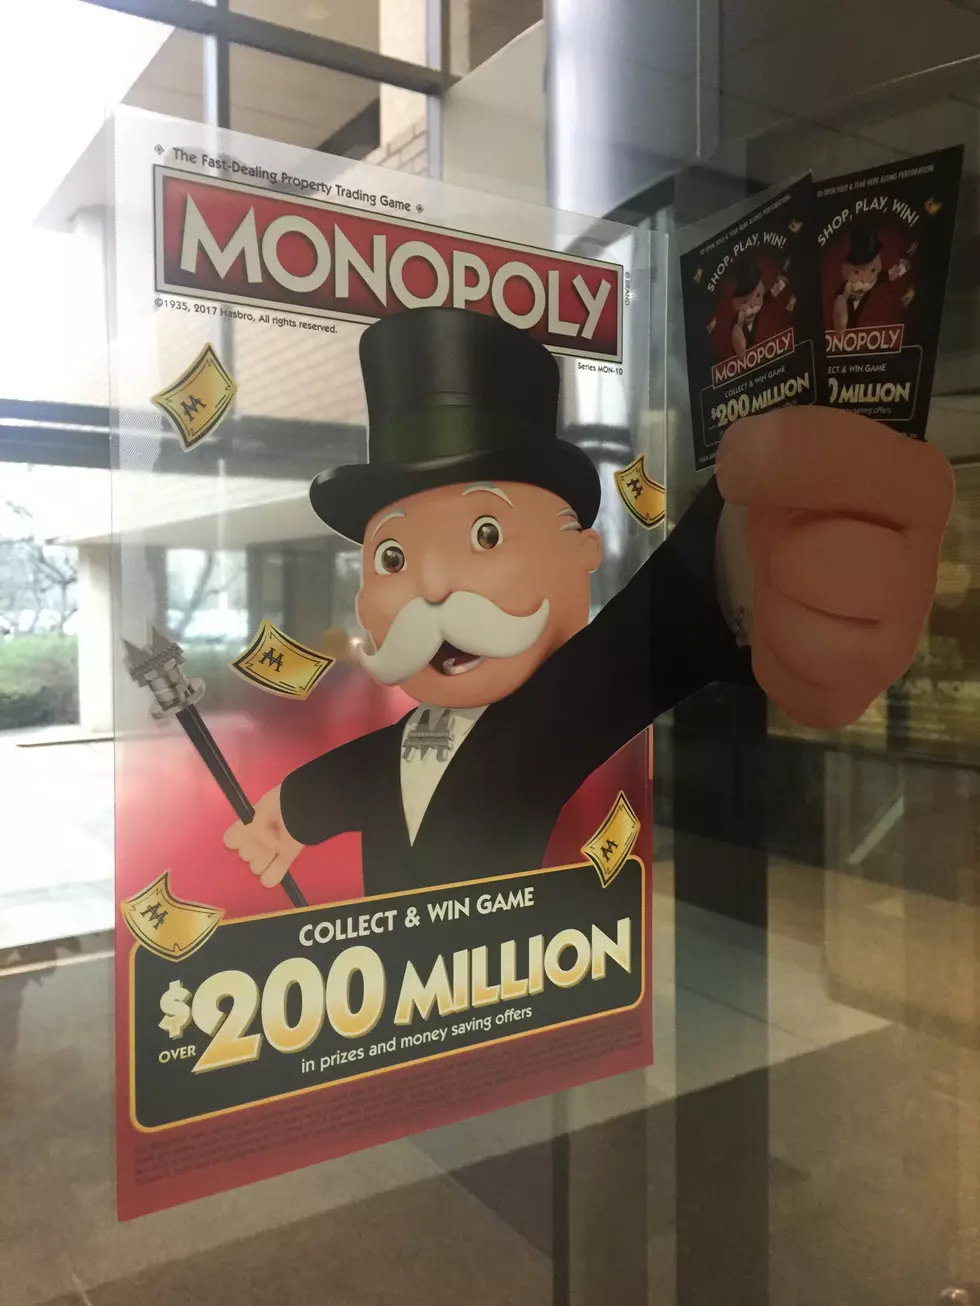 This is a Game-Changer for Albertsons’ Monopoly